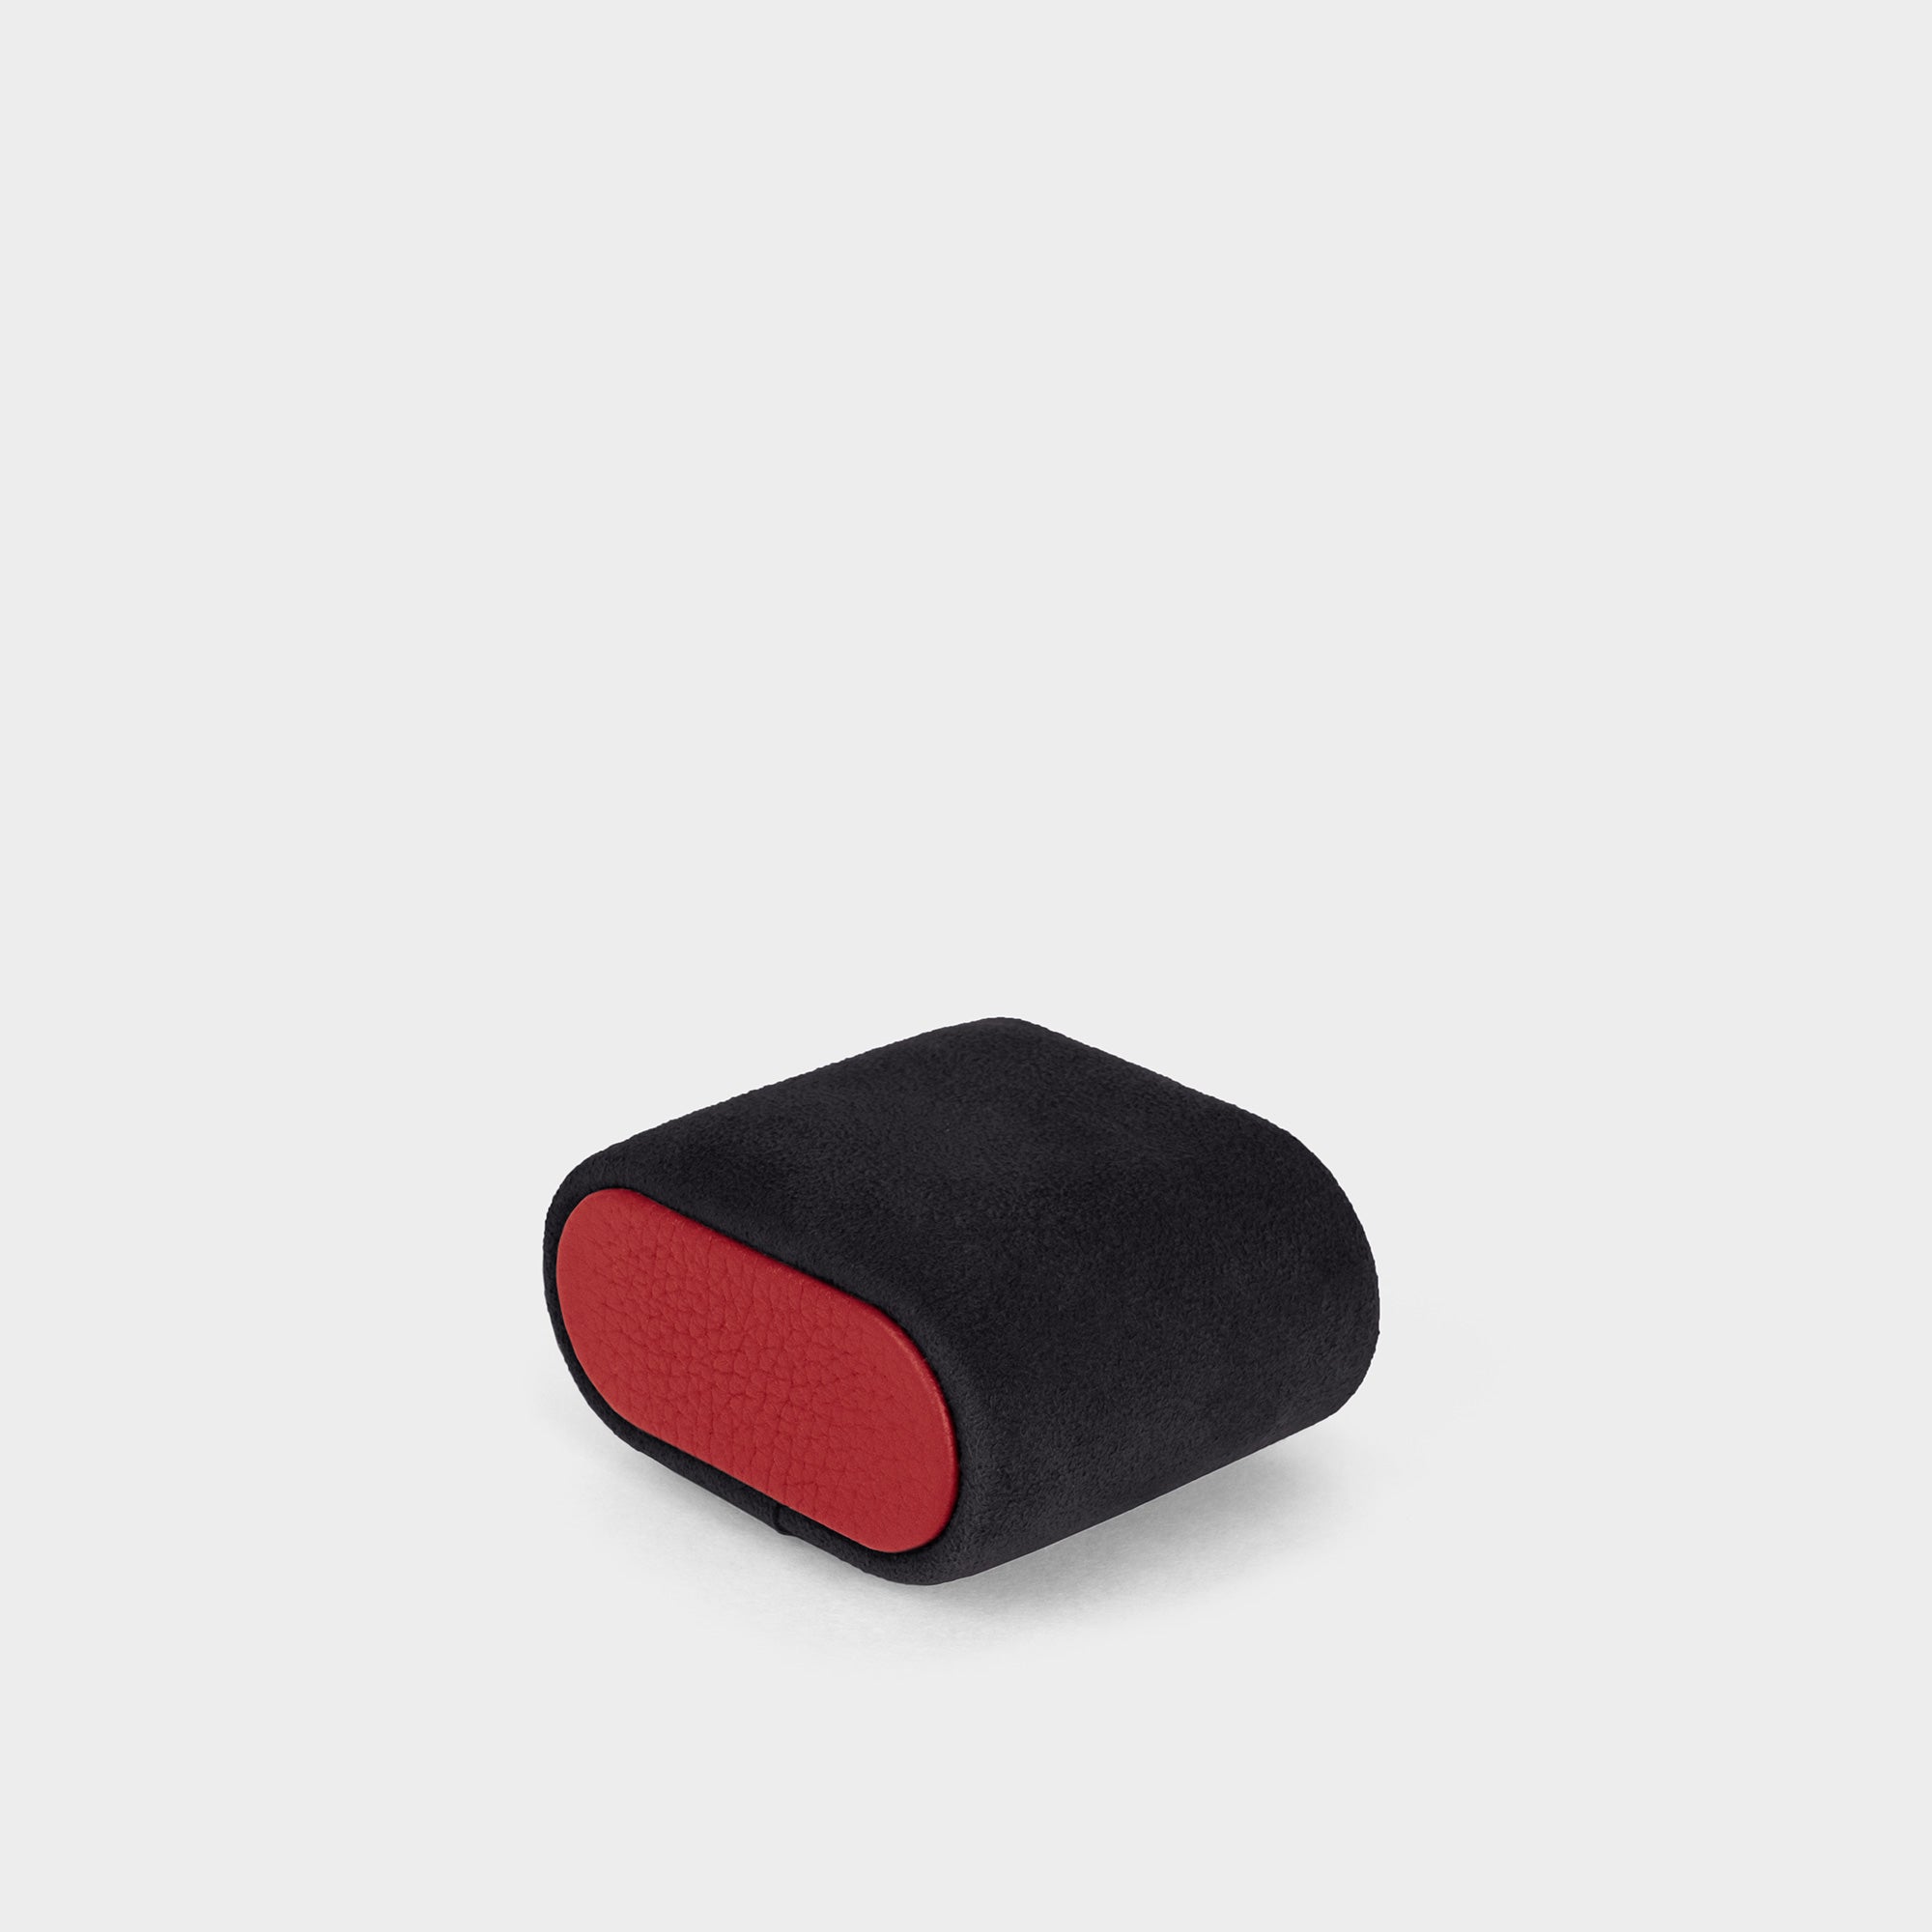 Watch cushion made from black, soft Alcantara featuring contrasting red leather accents. Custom sizing available.